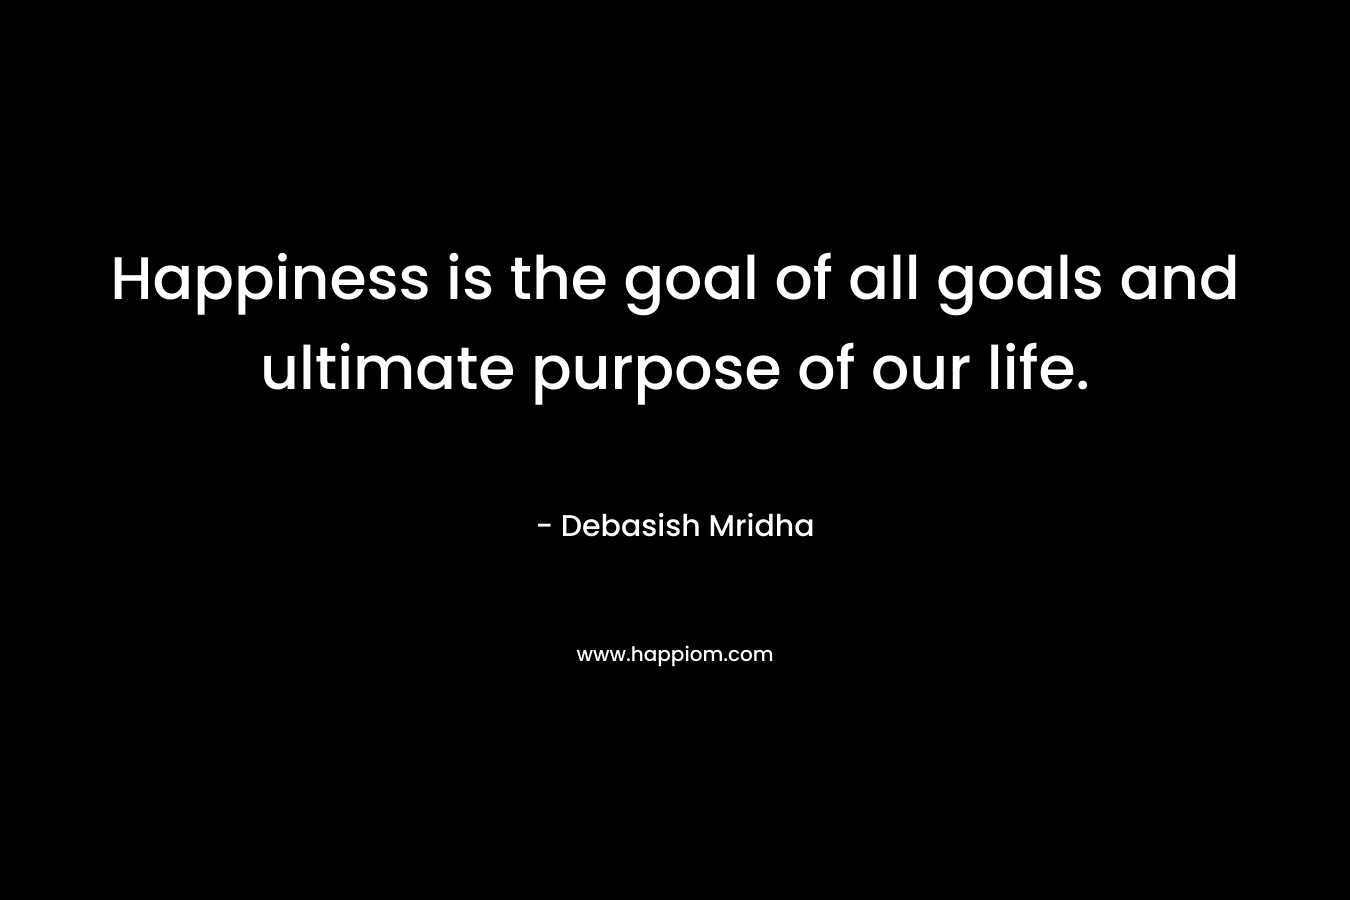 Happiness is the goal of all goals and ultimate purpose of our life. – Debasish Mridha